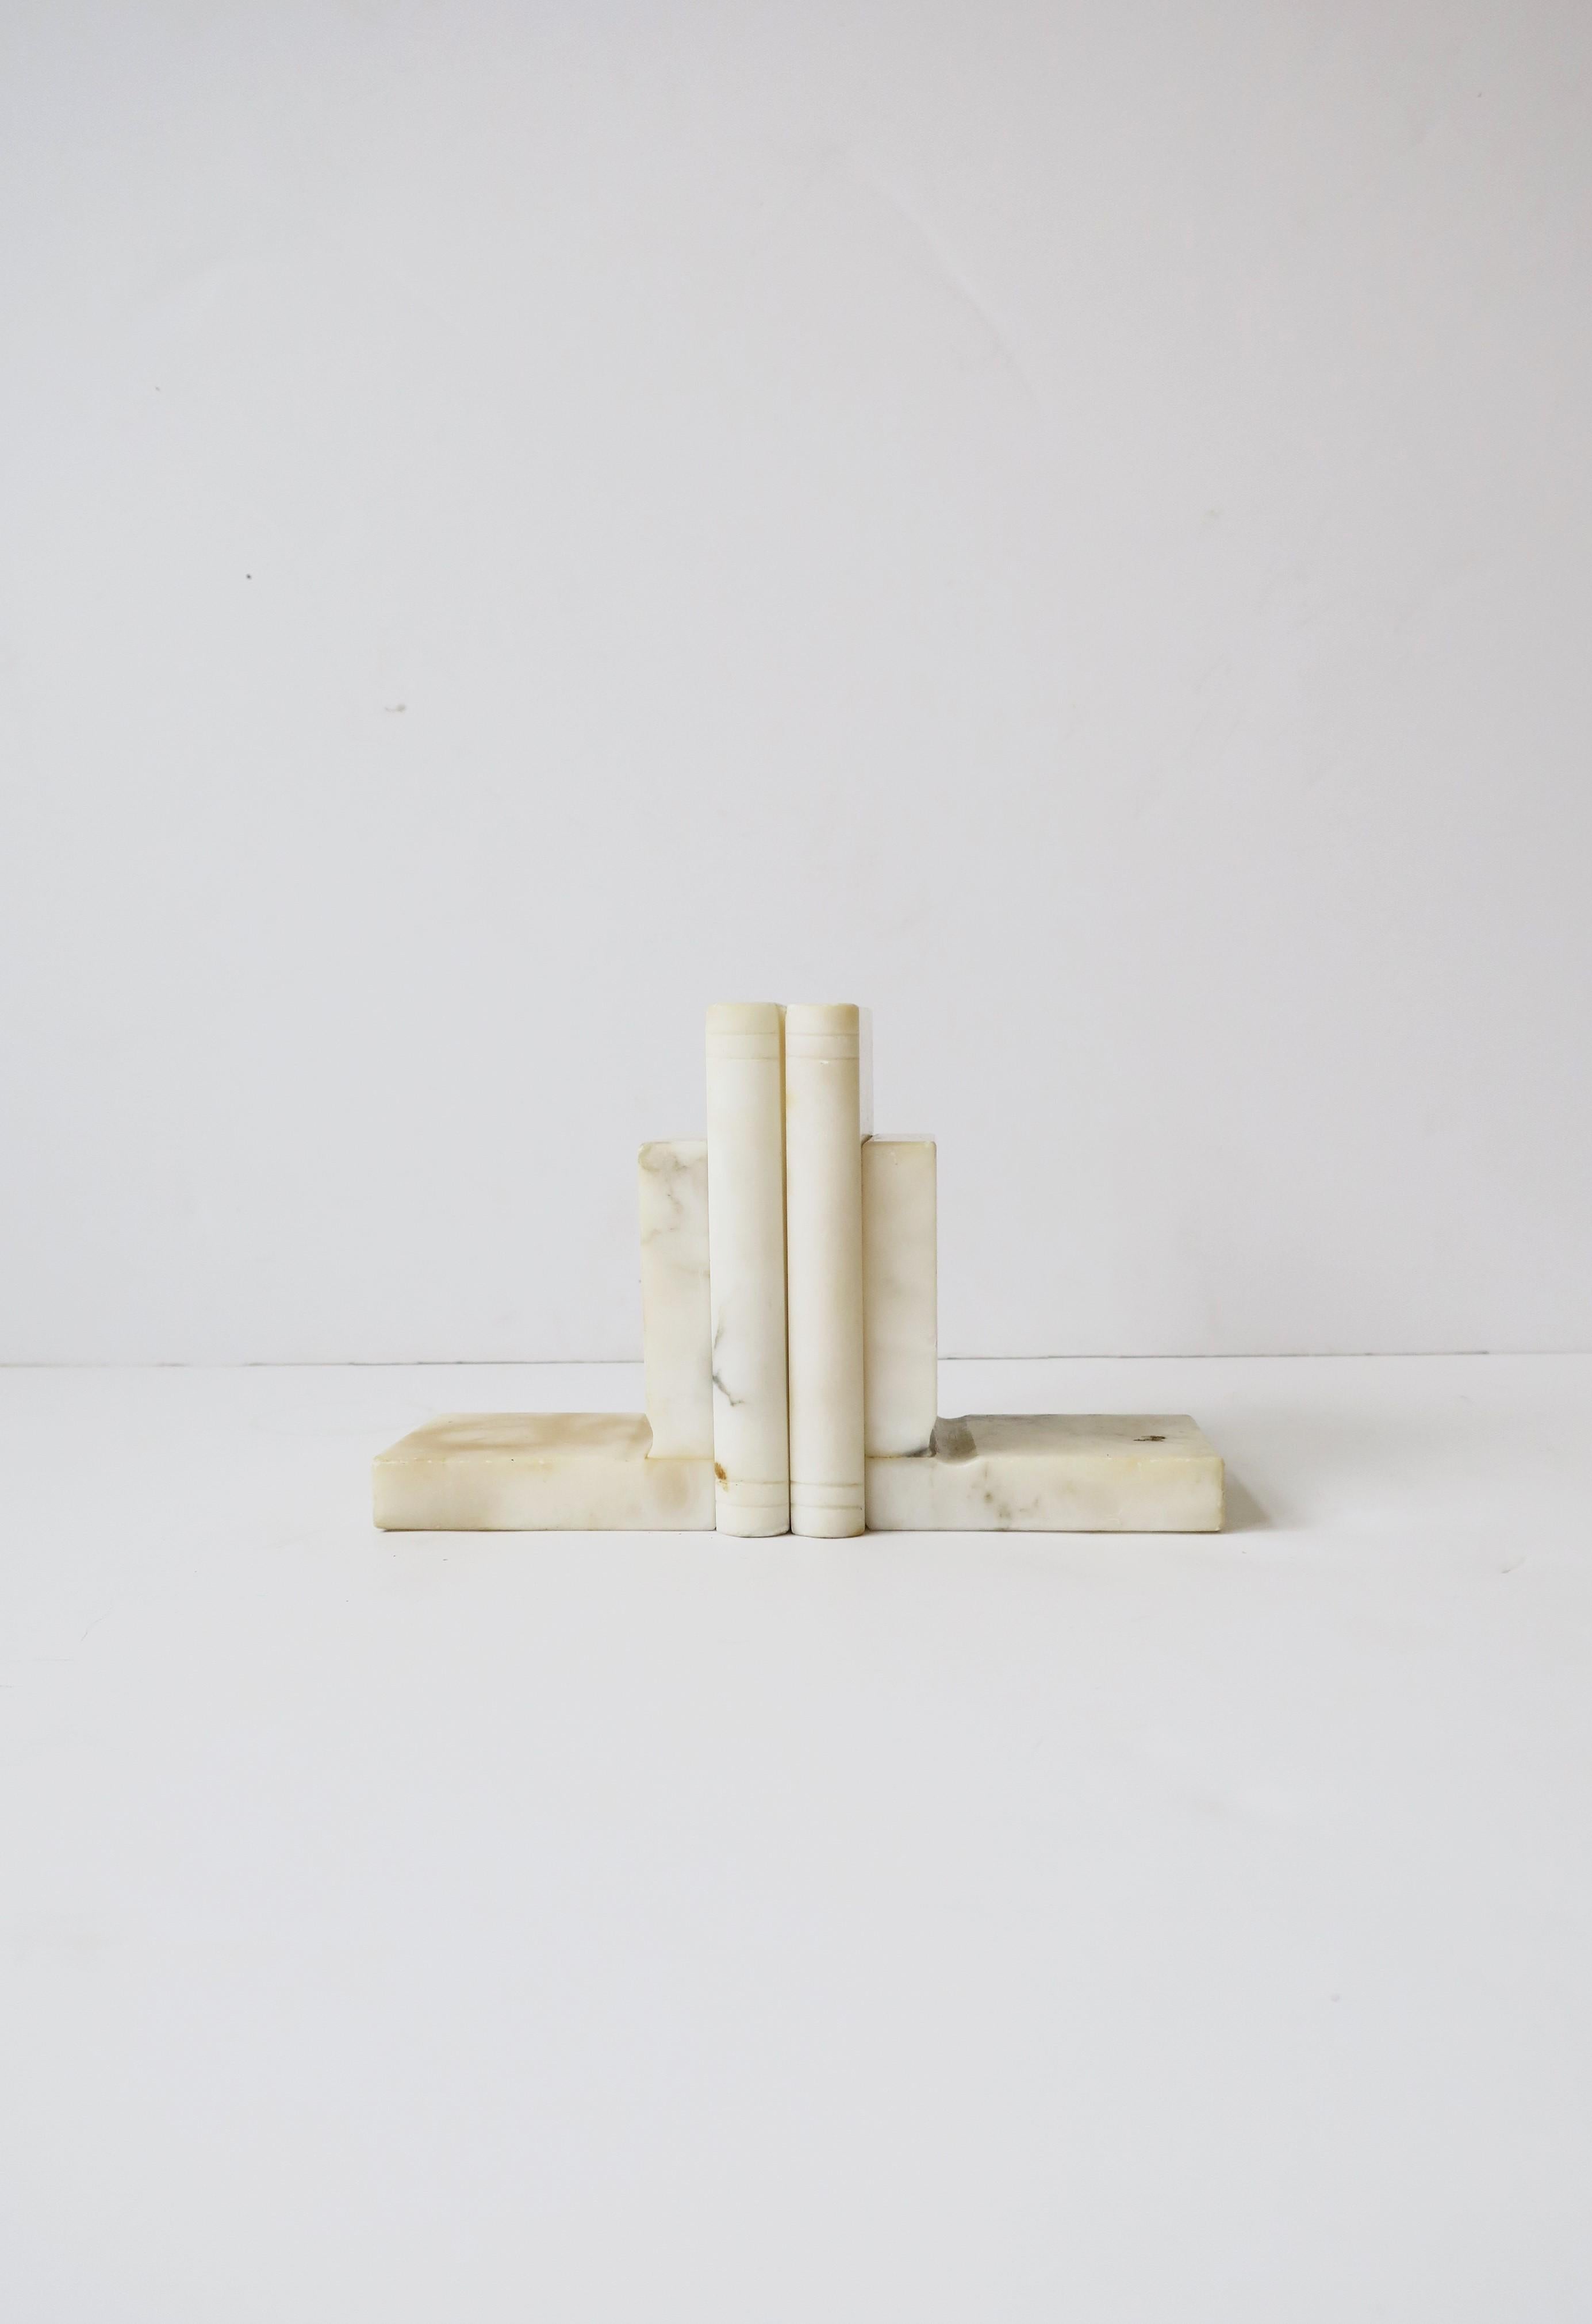 A small and substantial pair of Italian Carrara marble 'book' bookends, circa early to mid-20th century, Italy. 

Dimension: 3.5